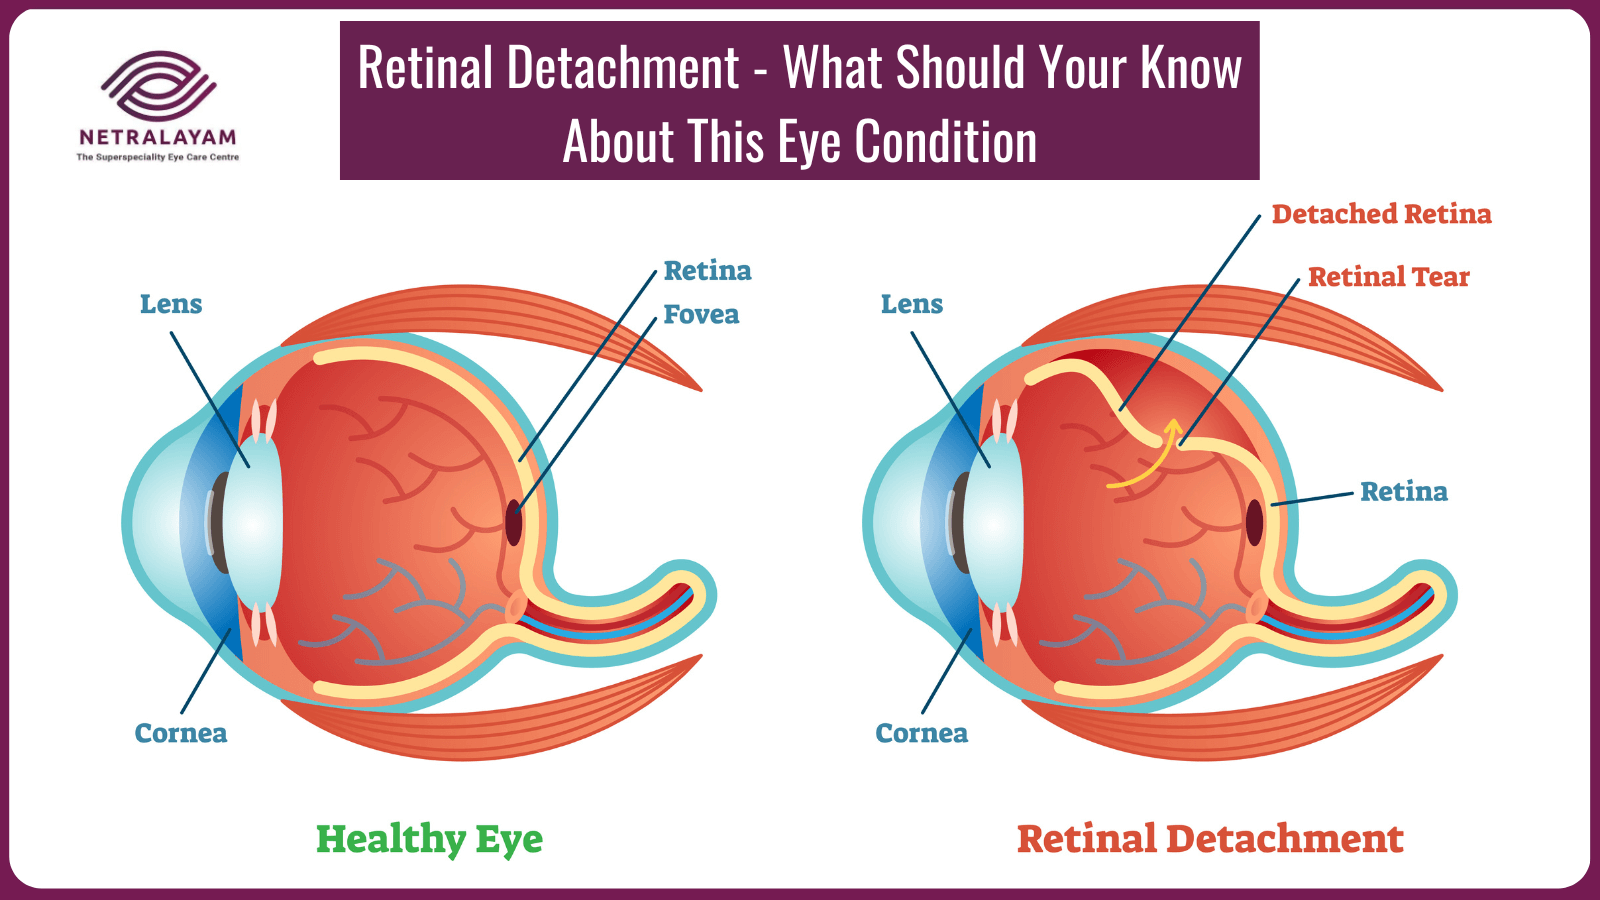 Retinal Detachment - What Should Your Know About This Eye Condition